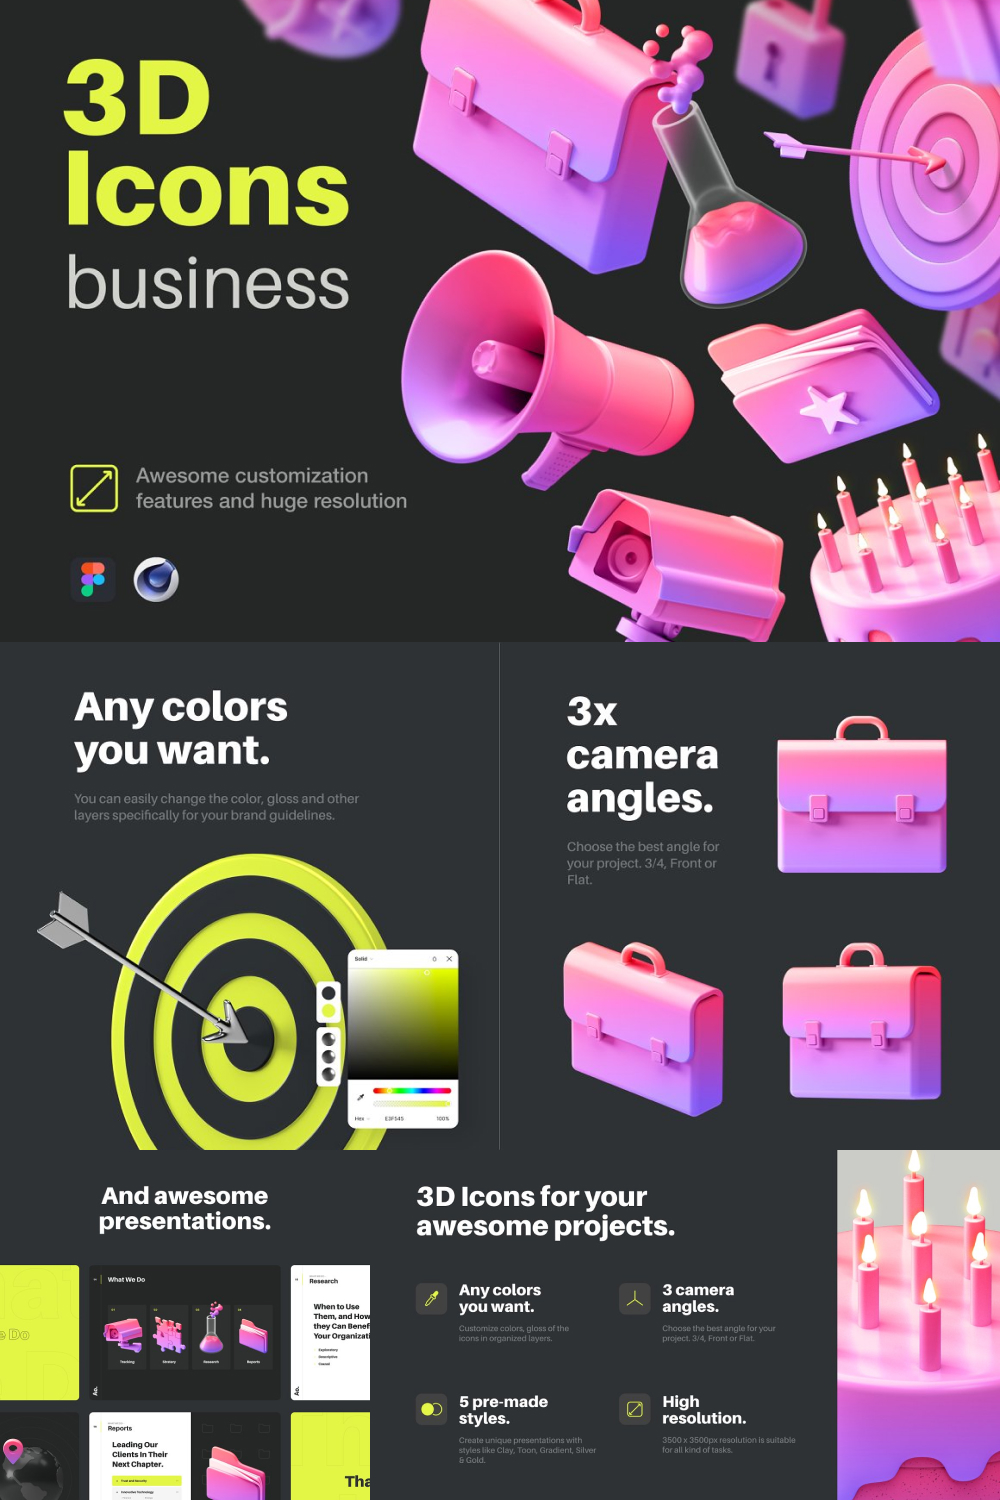 Multiangle 3D Icons / Business - Pinterest.